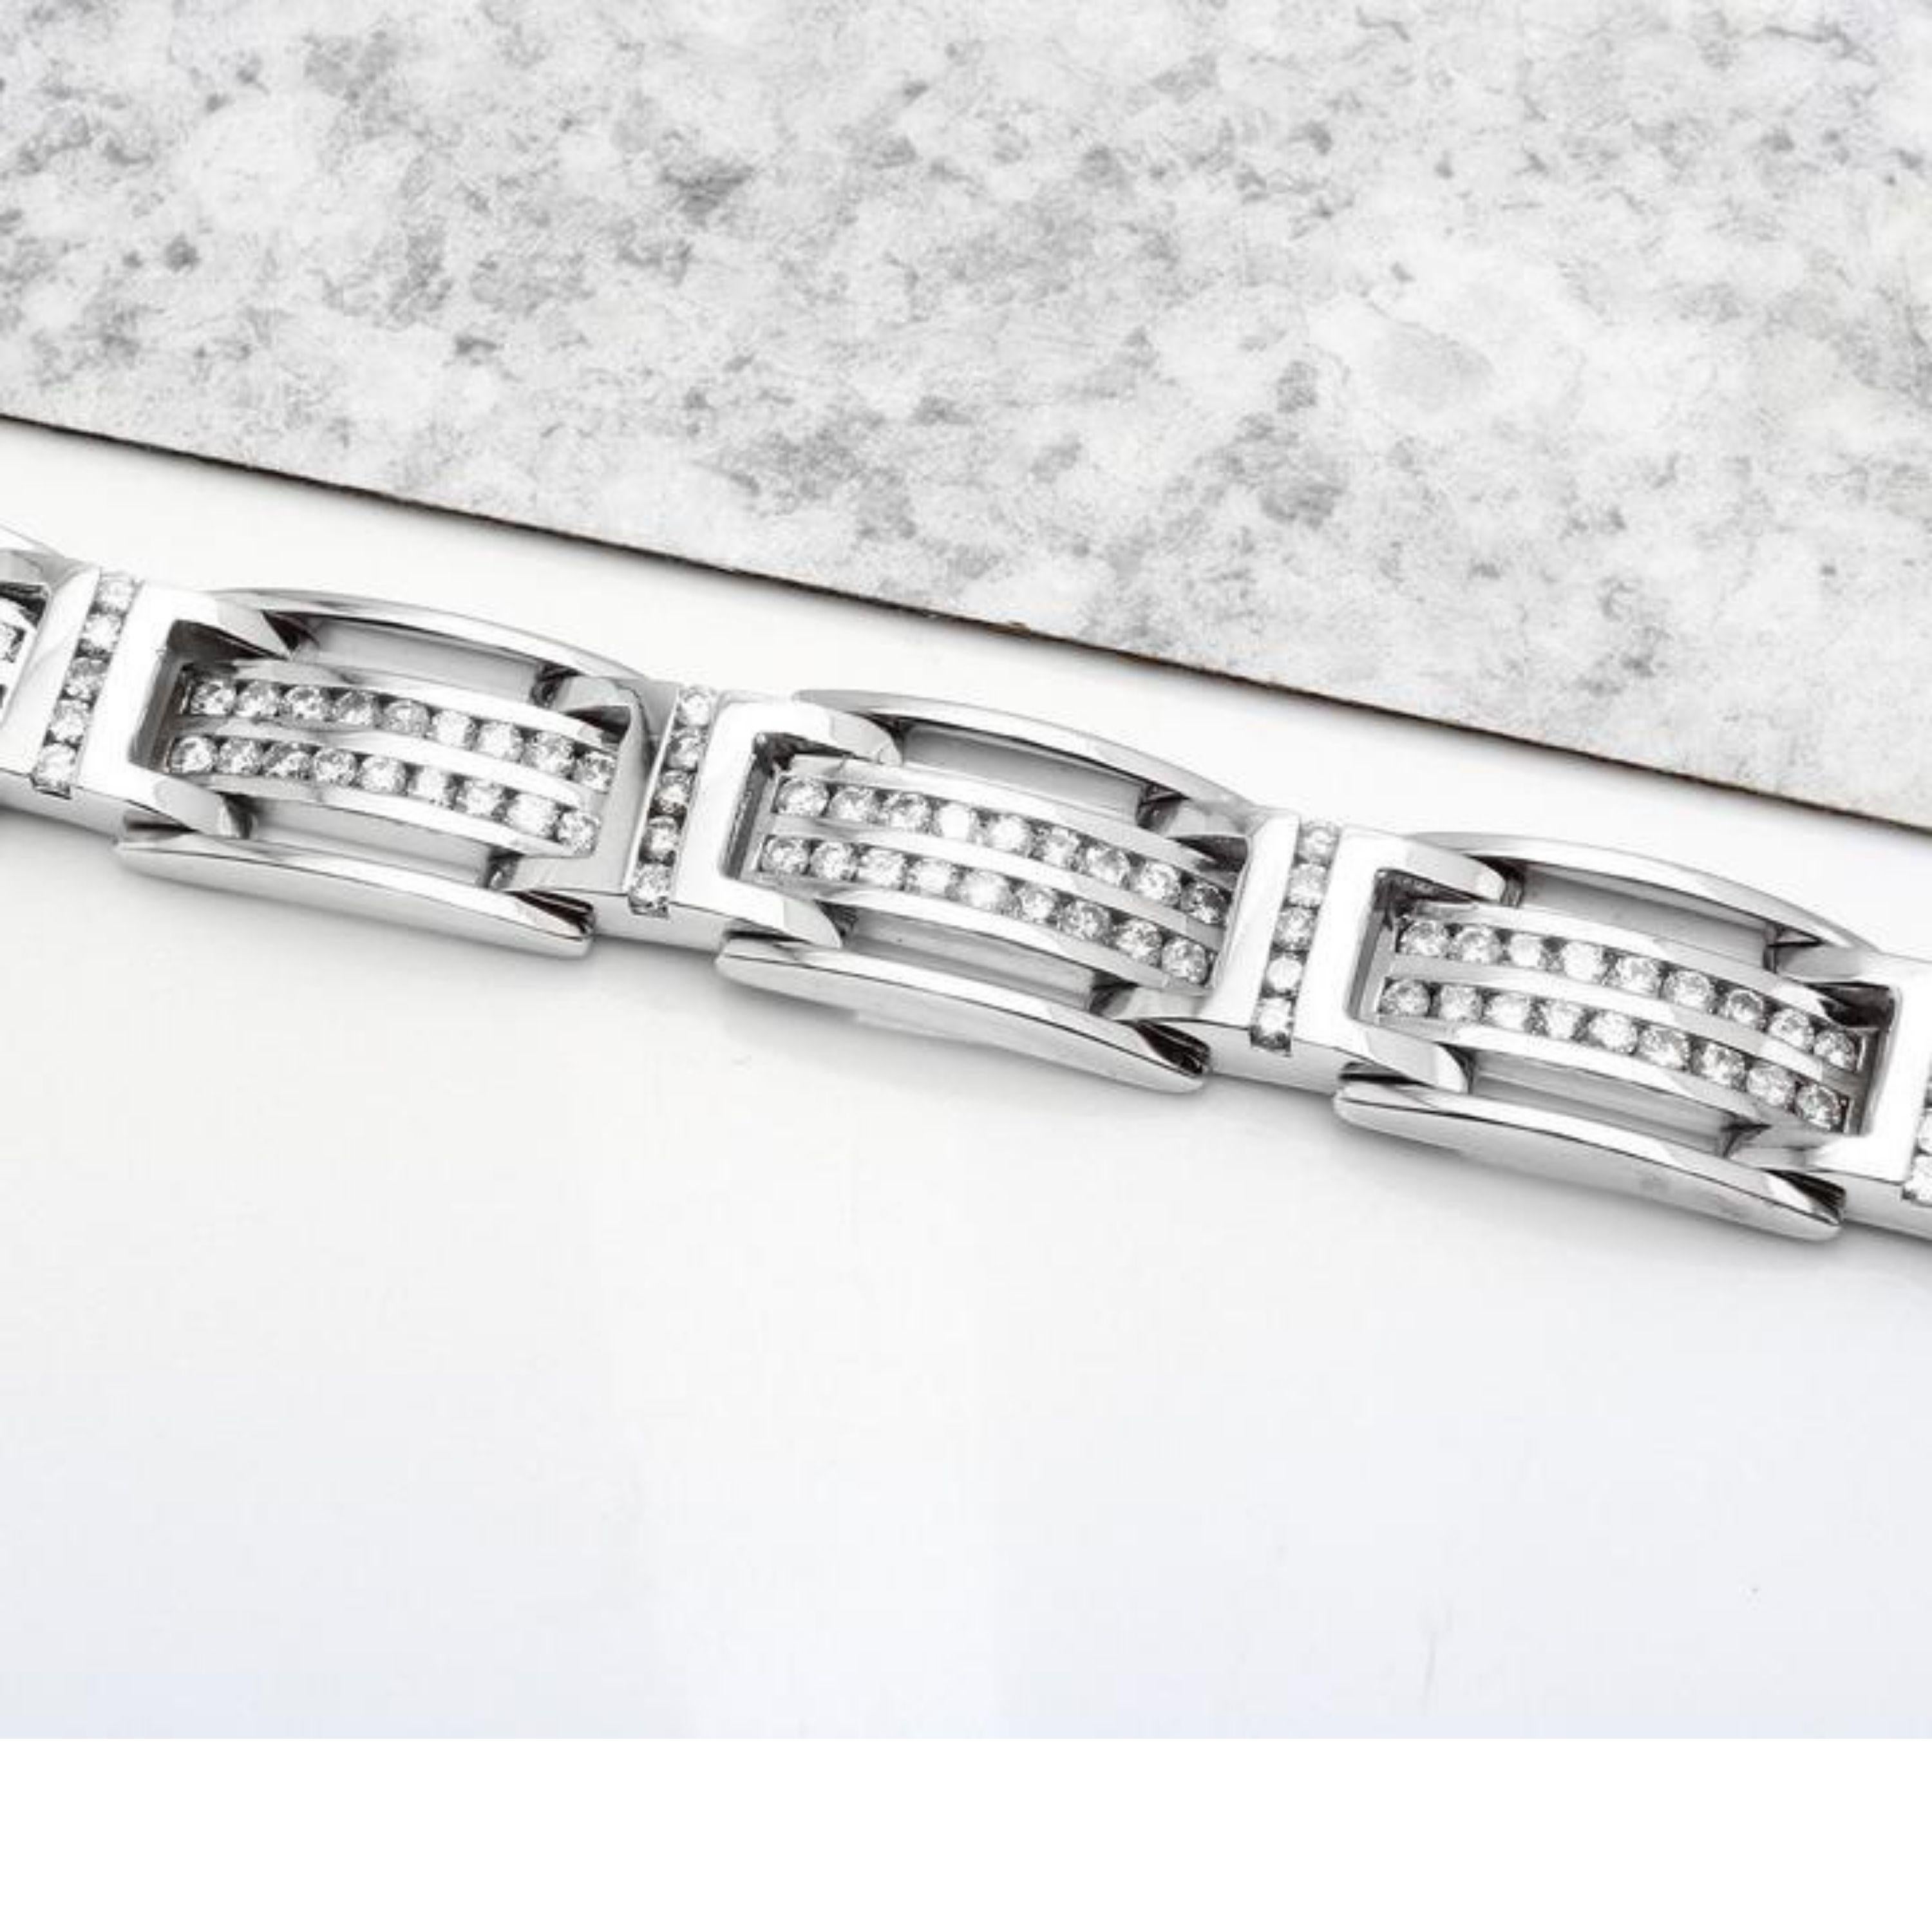 Very Impressive 5.67 Carats Natural Diamond 14K Solid White Gold Bracelet

STAMPED: 14K

Total Natural Round Cut Diamonds Weight is: 5.67 Carats (color H-I / Clarity SI1-SI3)

Bracelet Length is: 8.75 inches

Width: 12.47mm

Bracelet total weight: